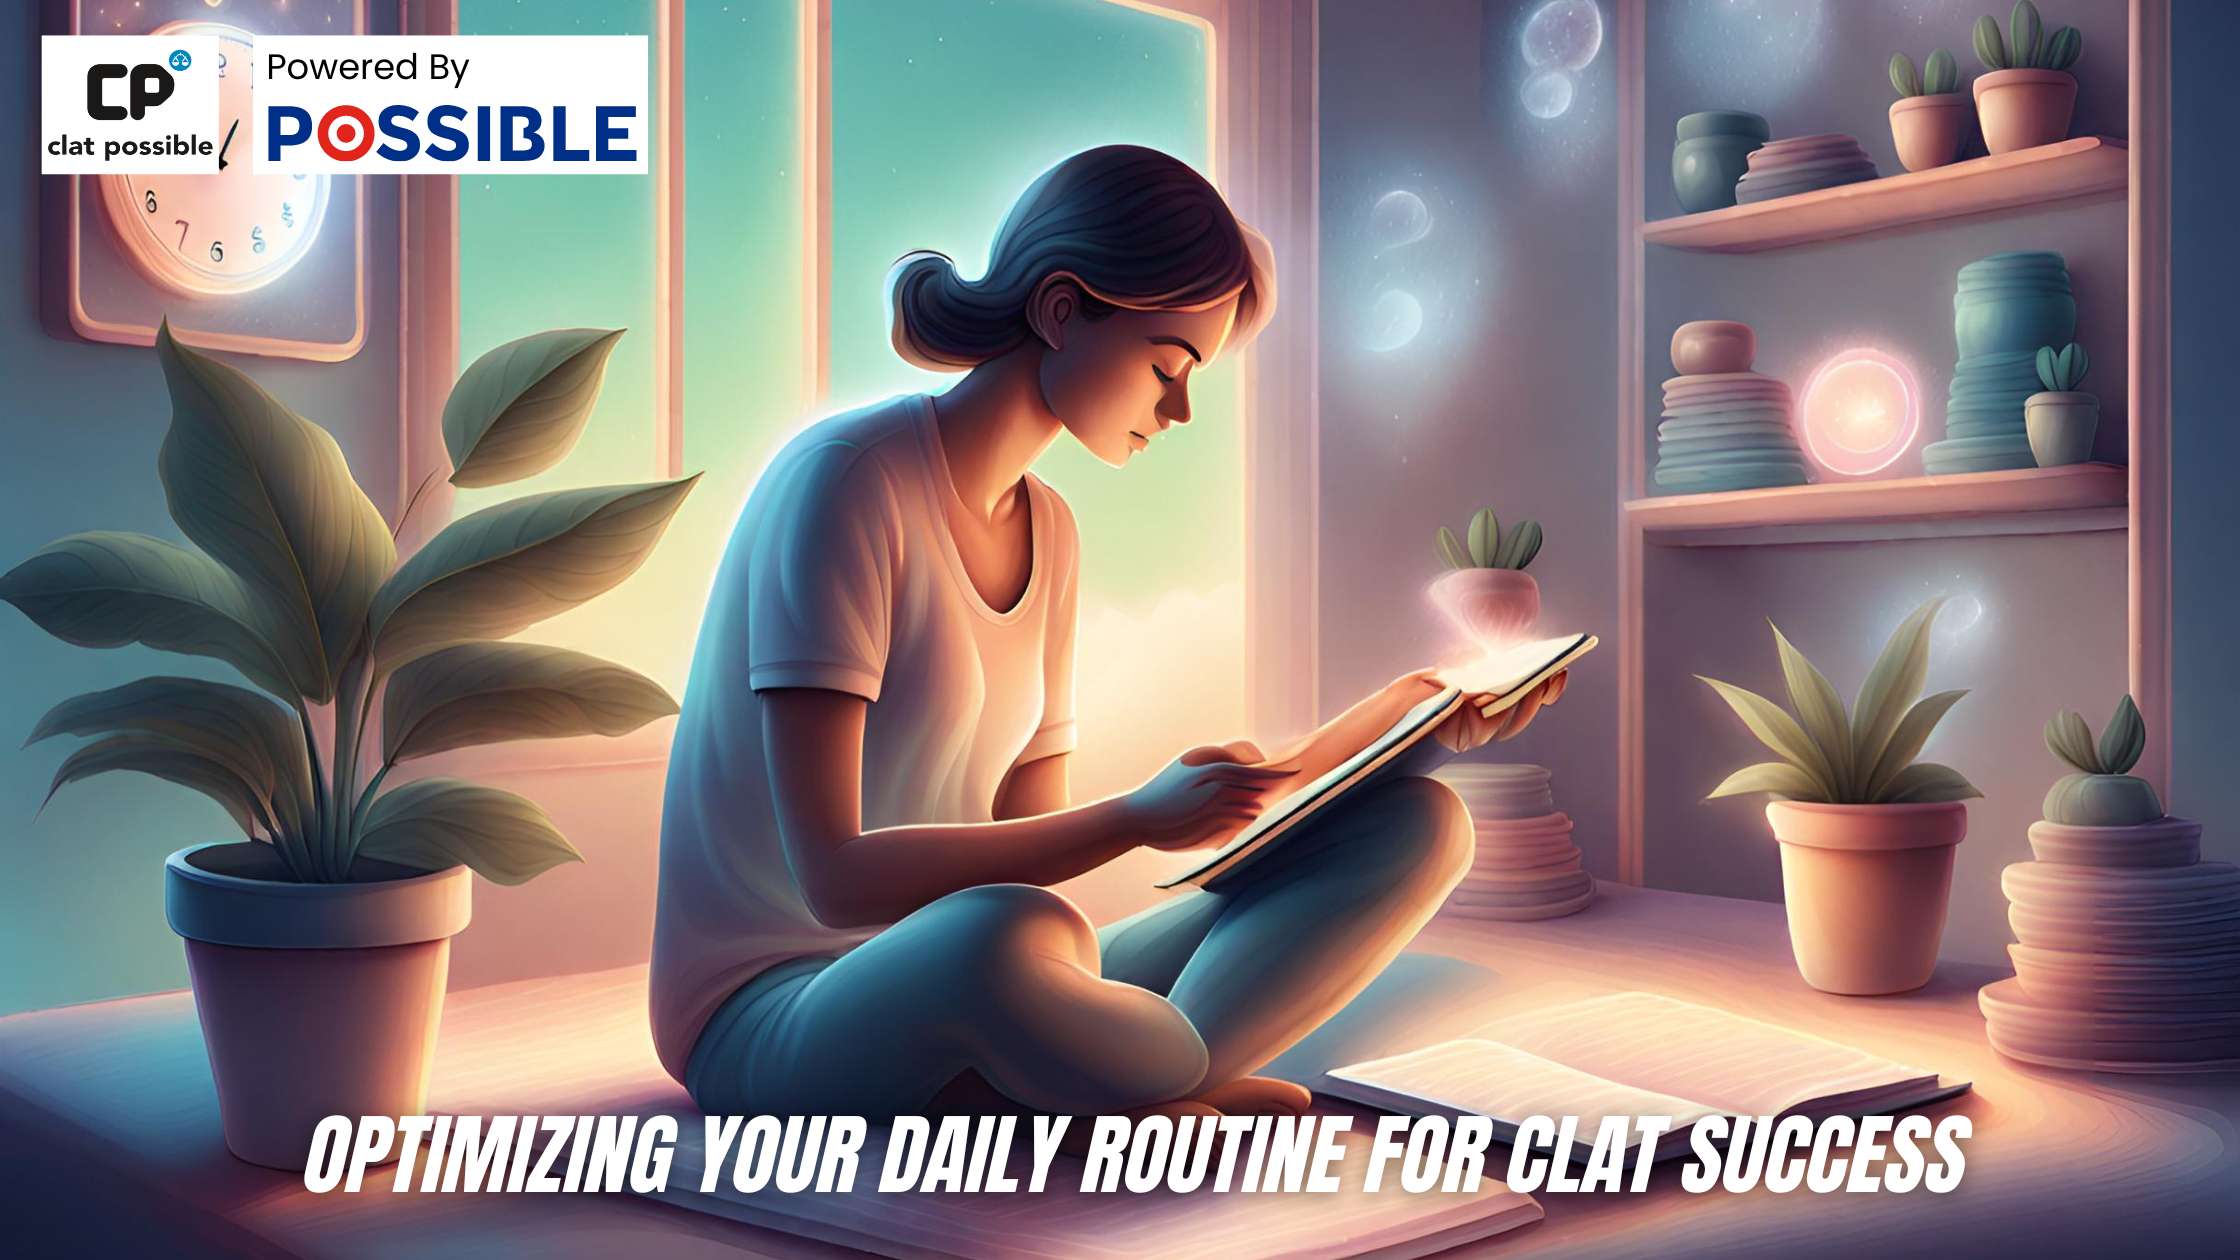 Optimizing Your Daily Routine for CLAT Success